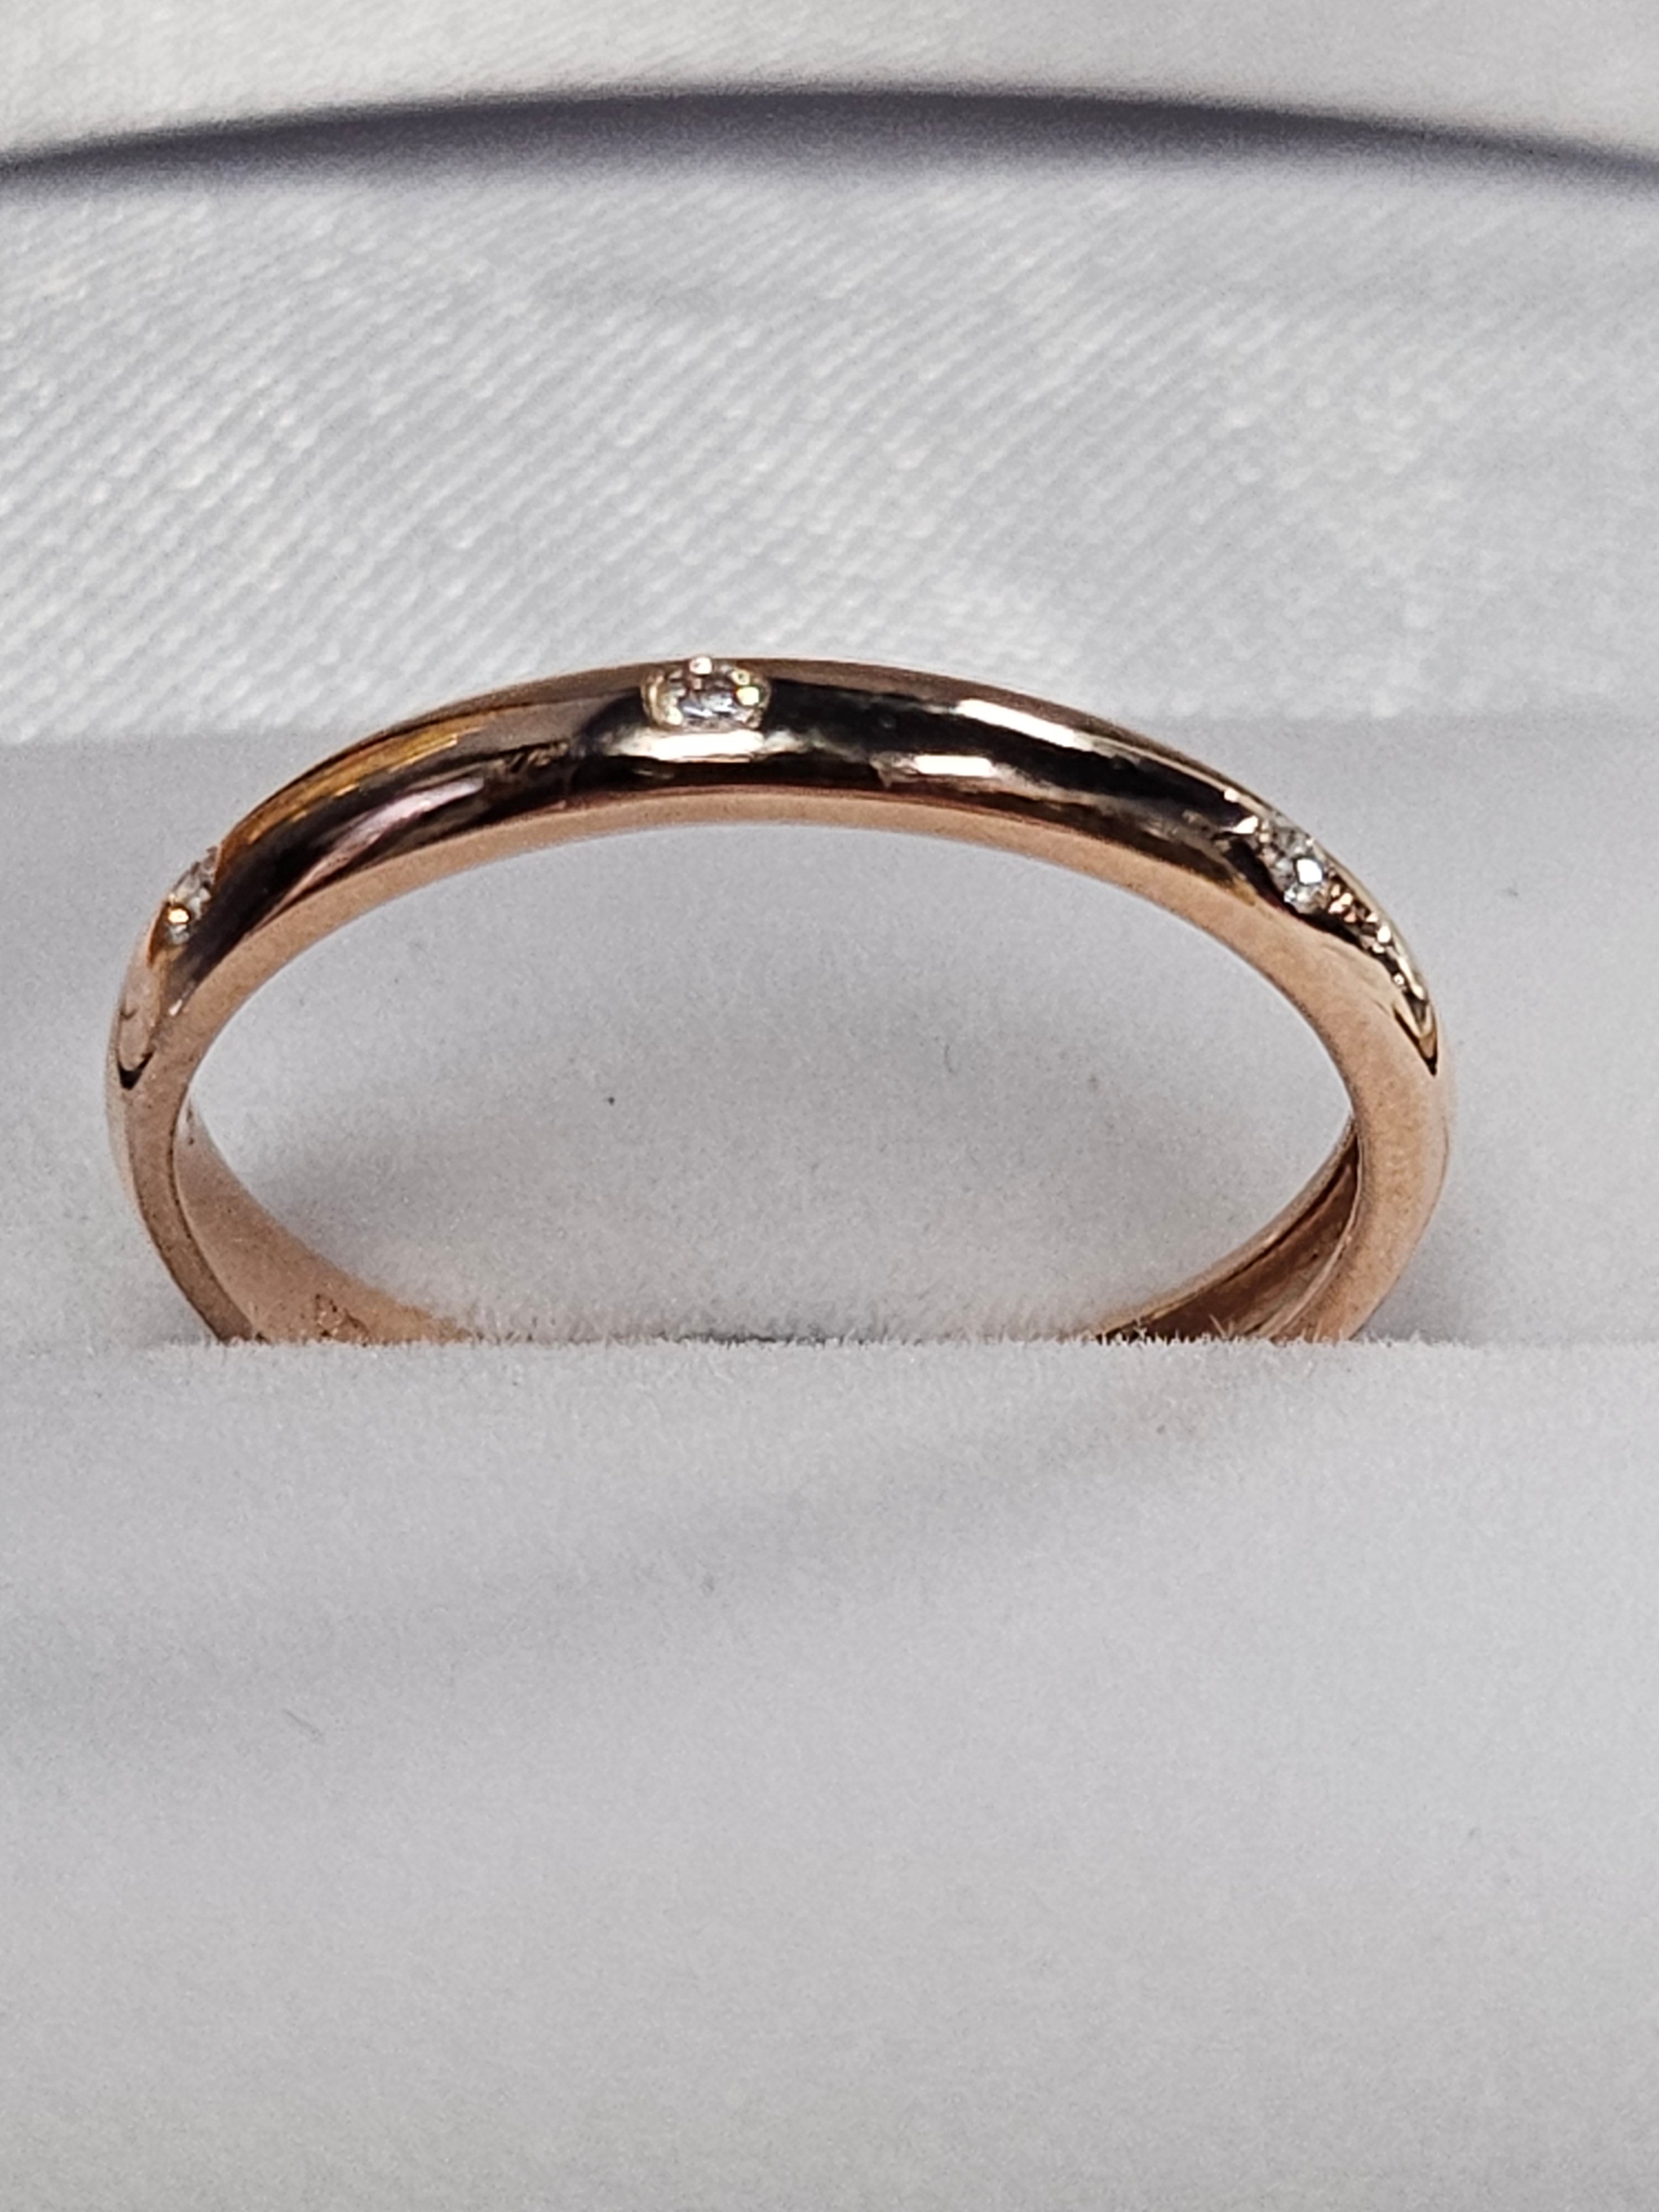 Gold Band - 14Kt Rose Gold - Ladies RM5621